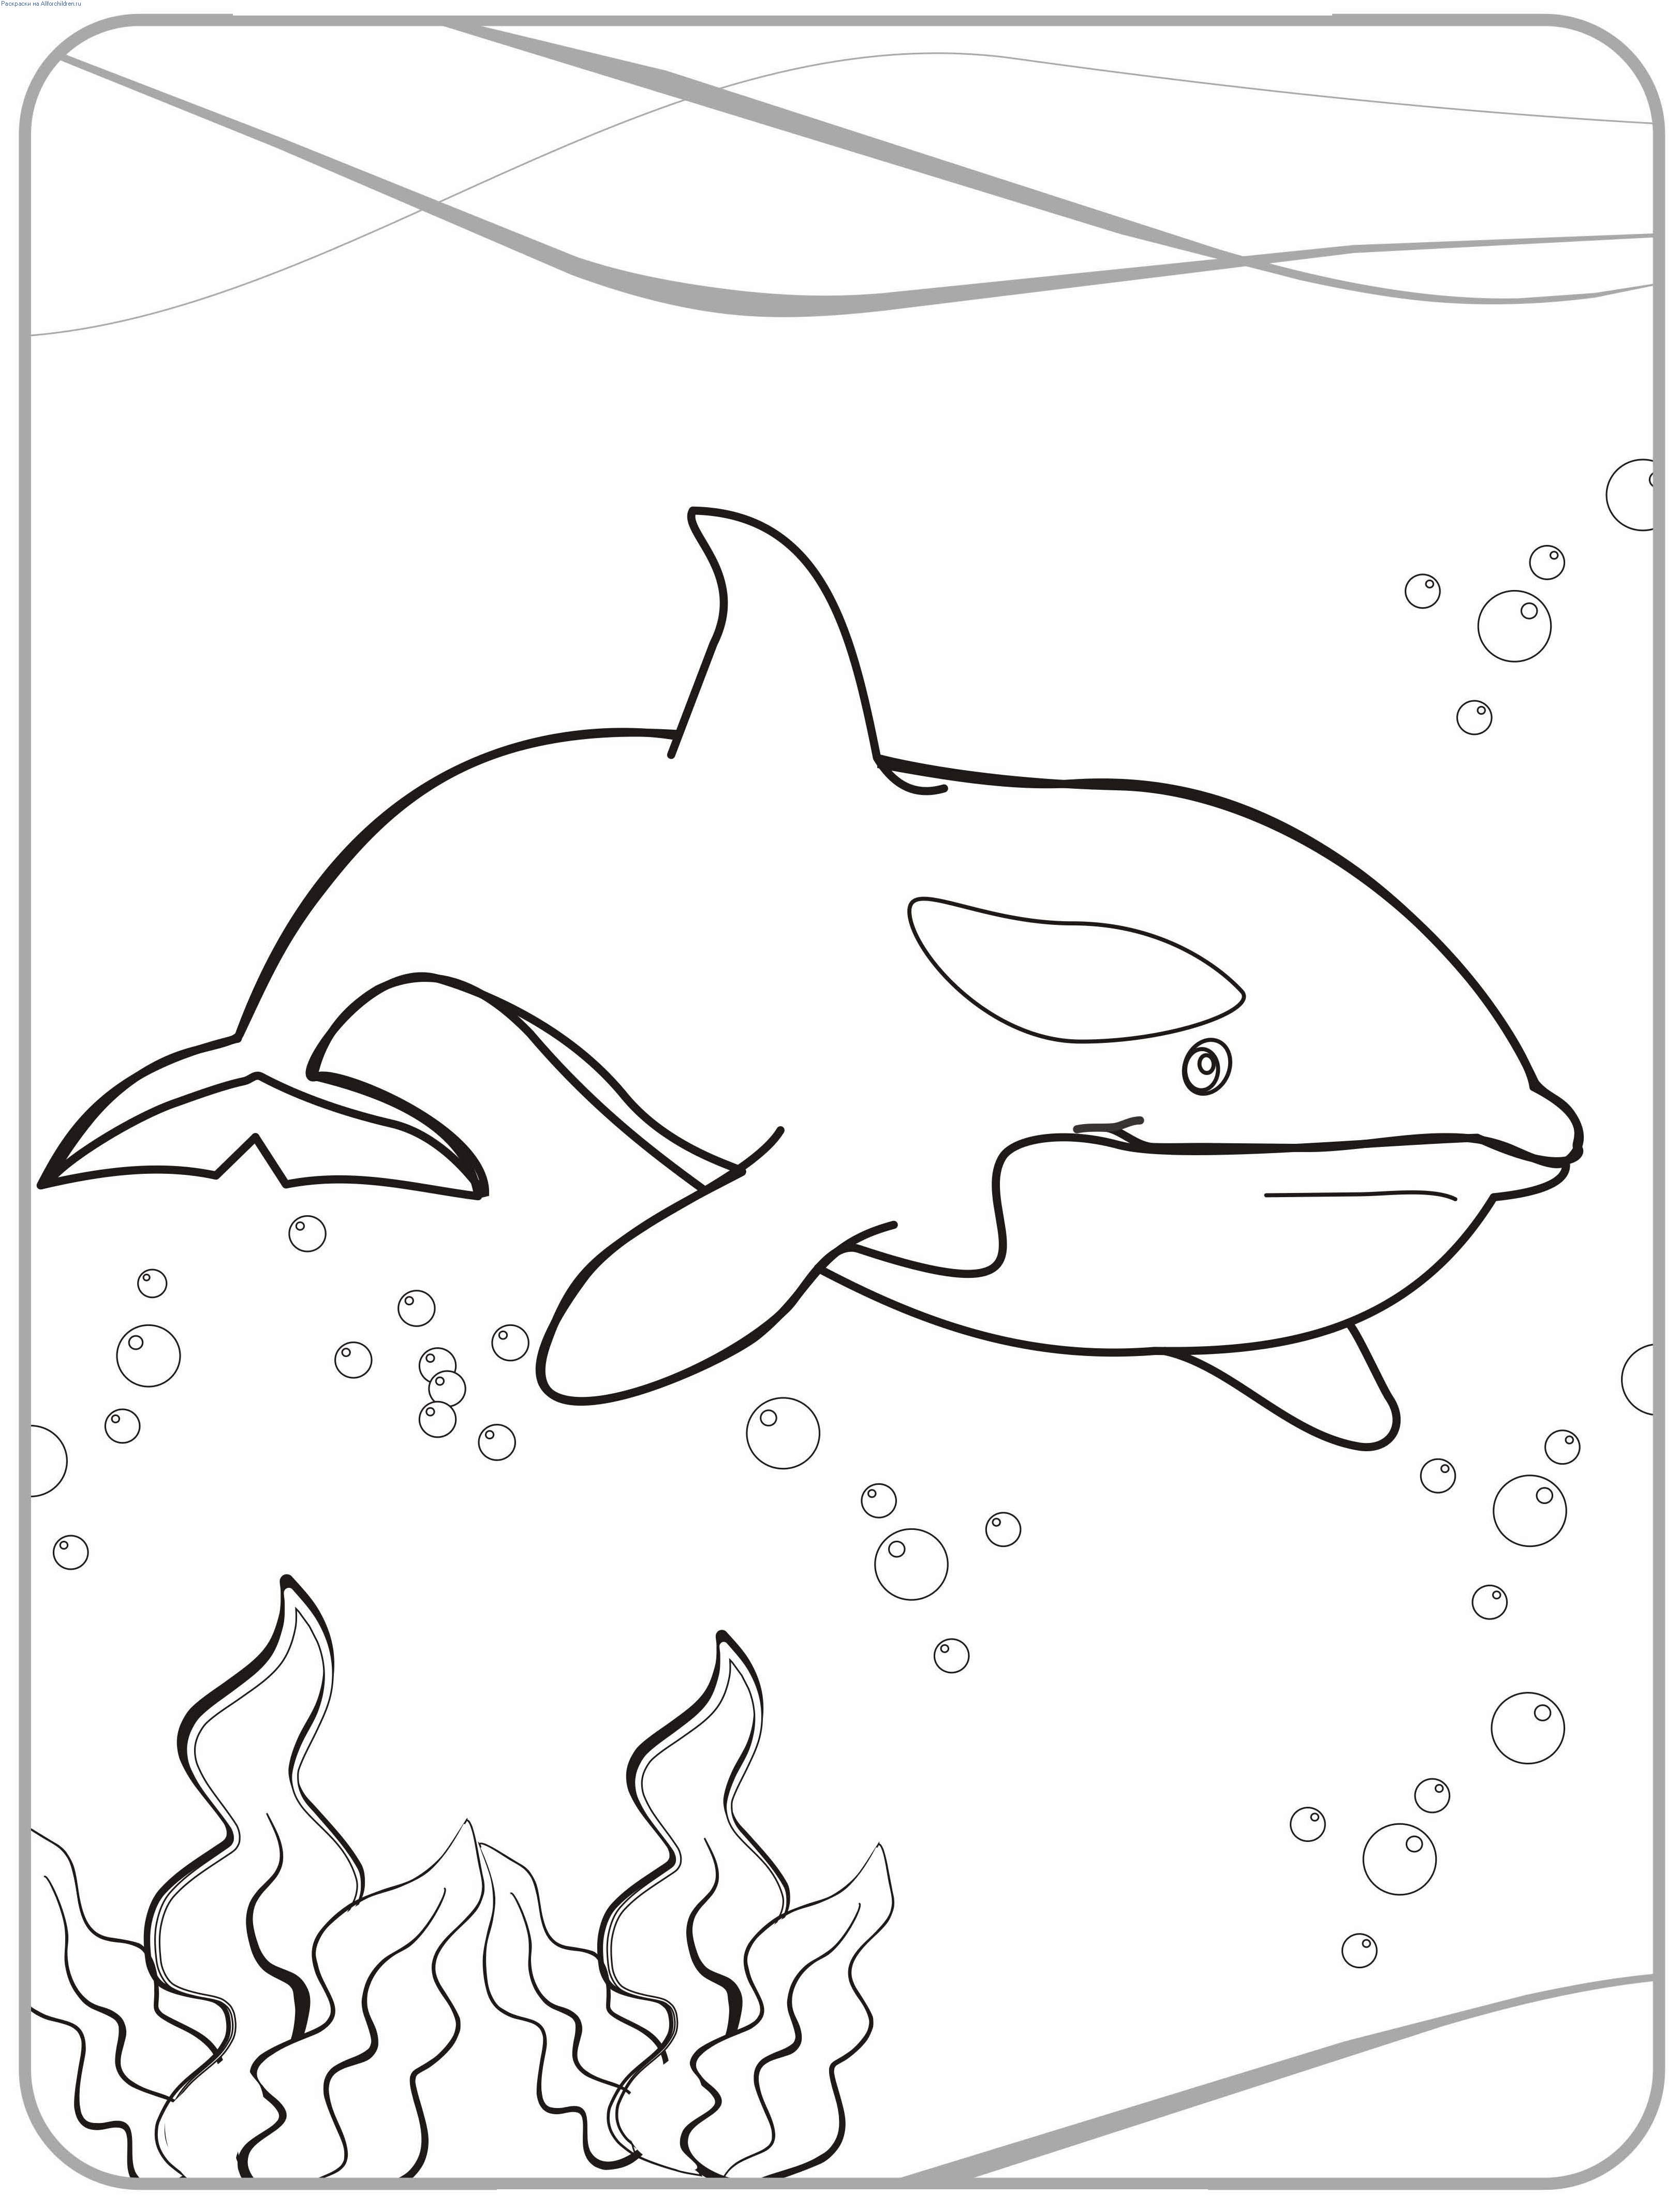 Killer whale Coloring Pages to download and print for free